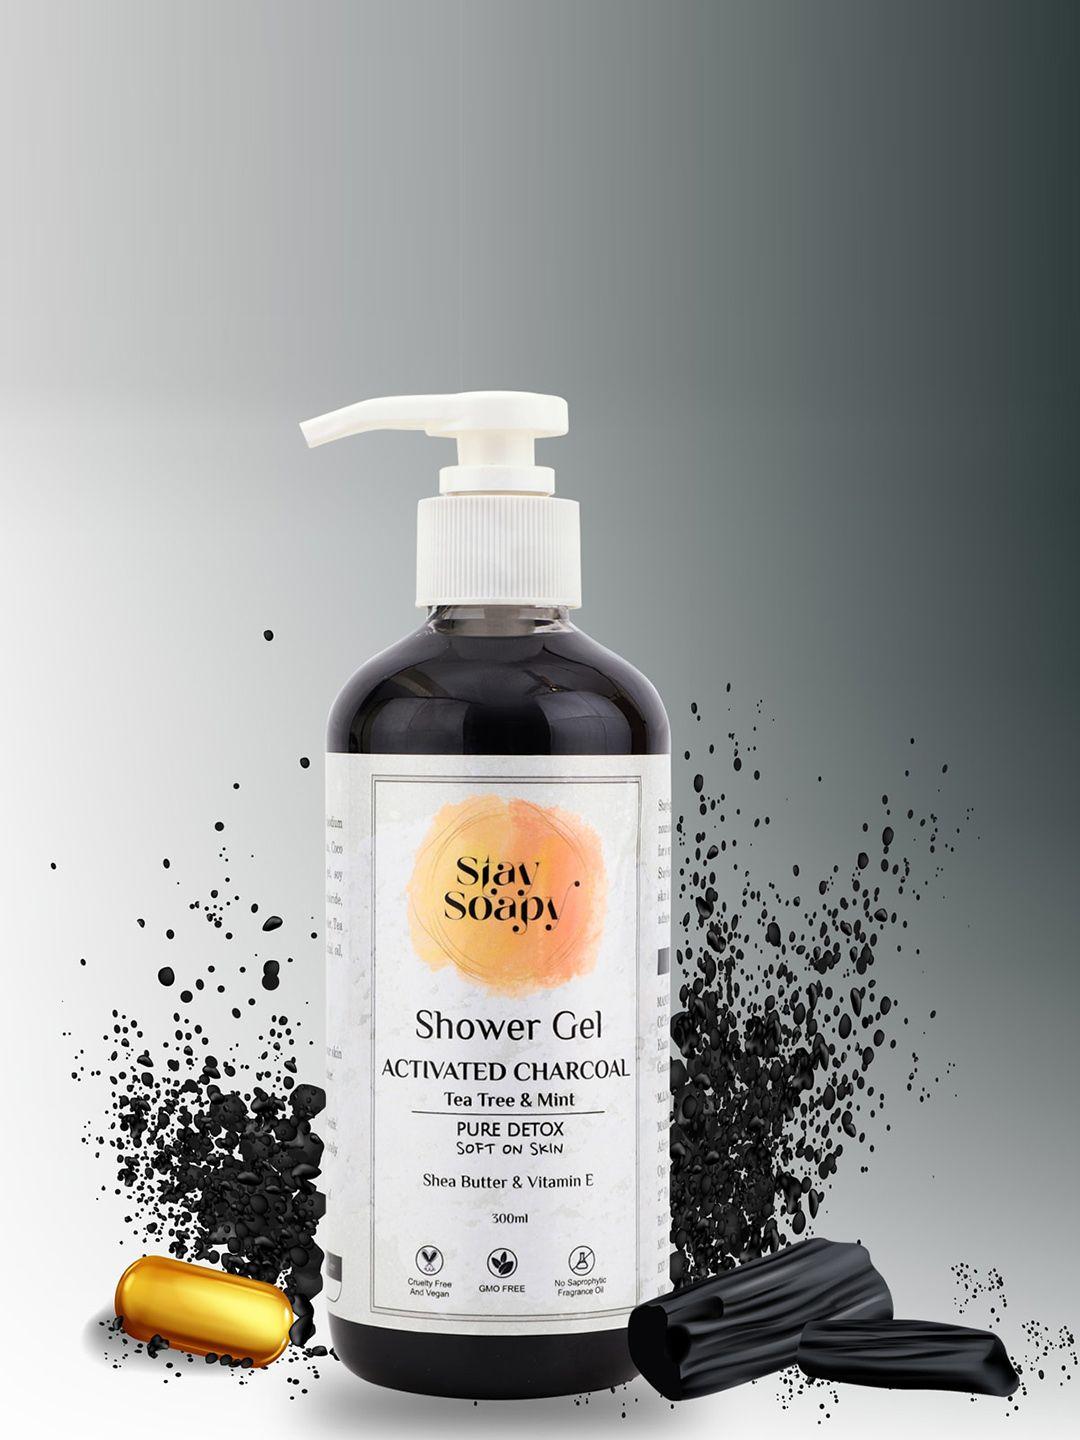 stay soapy set of 3 activated charcoal with tea tree & mint shower gel 300ml each